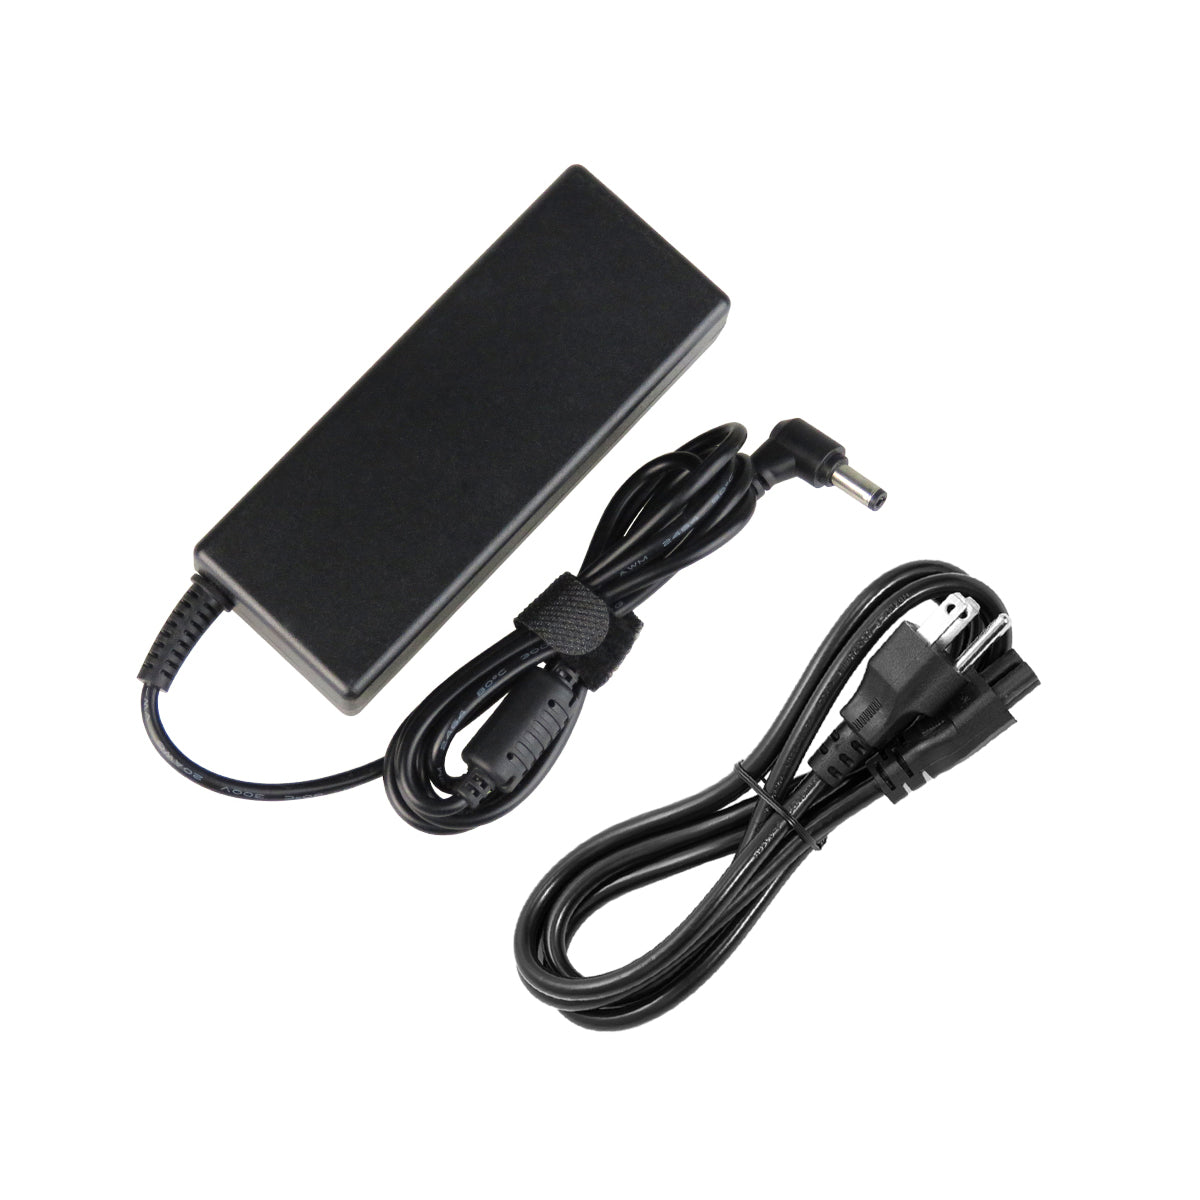 AC Adapter Charger for ASUS M60J Notebook.